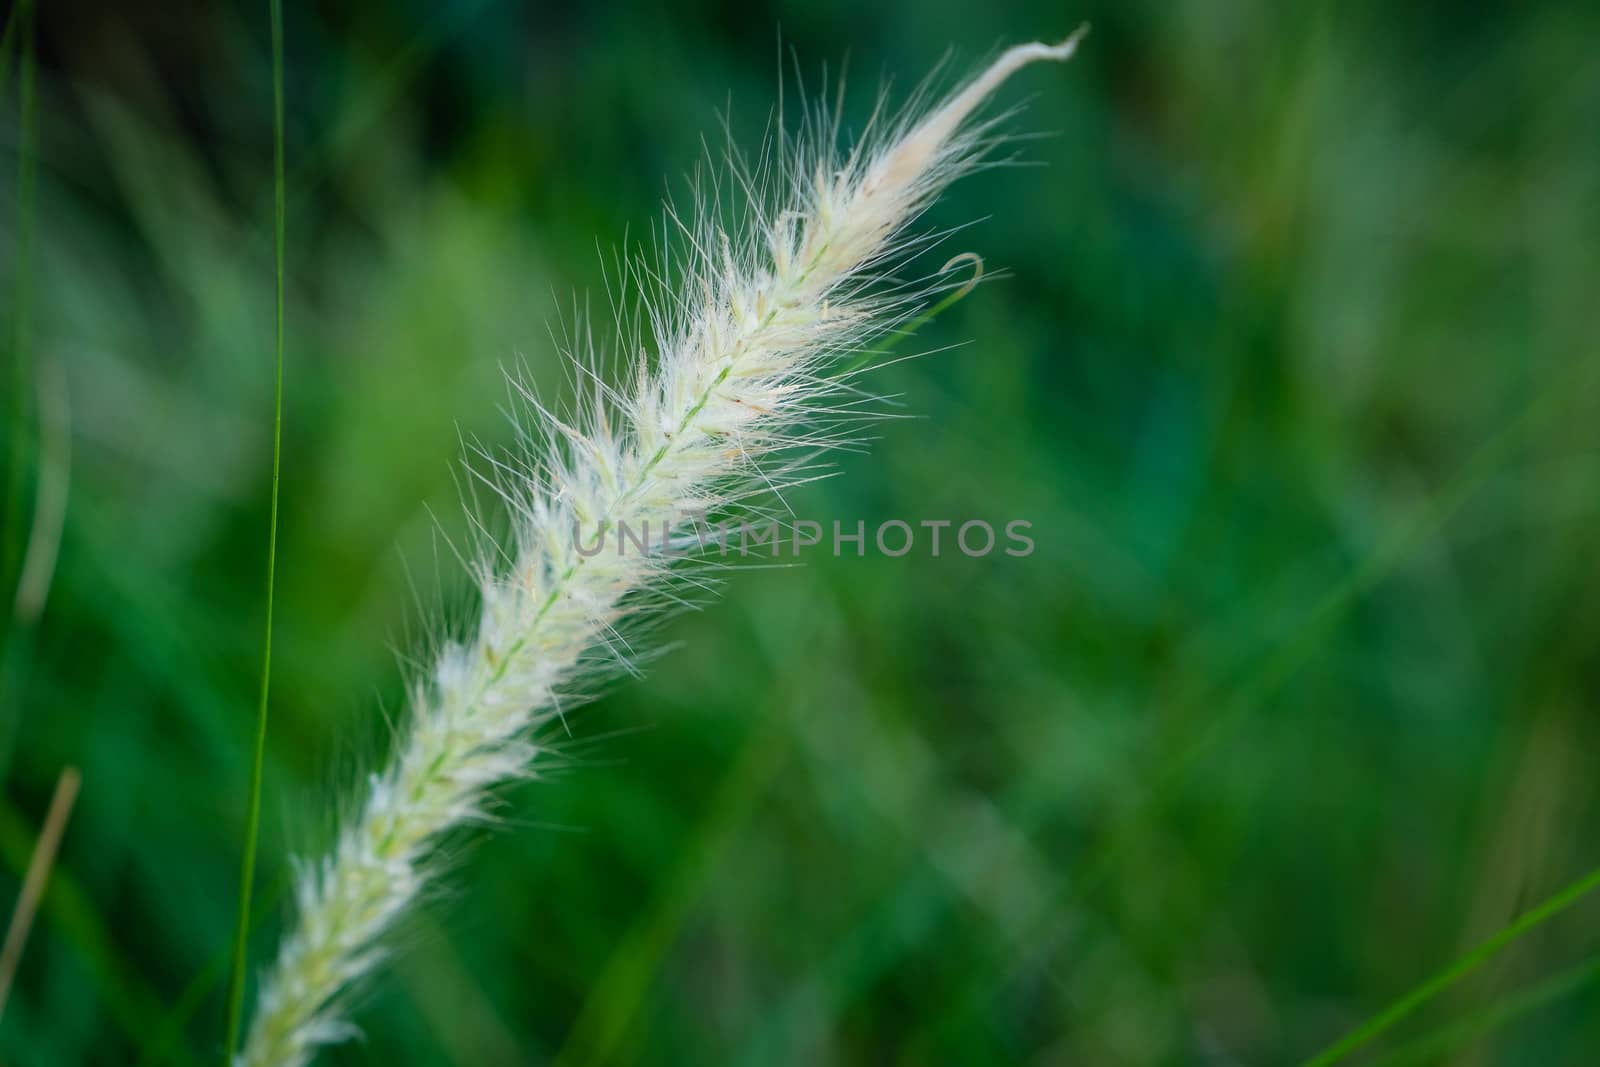 The Communist grass flowers in sunlight. Communist grass flower in sunlight during sunset, Bright shinny flowers with their hair.